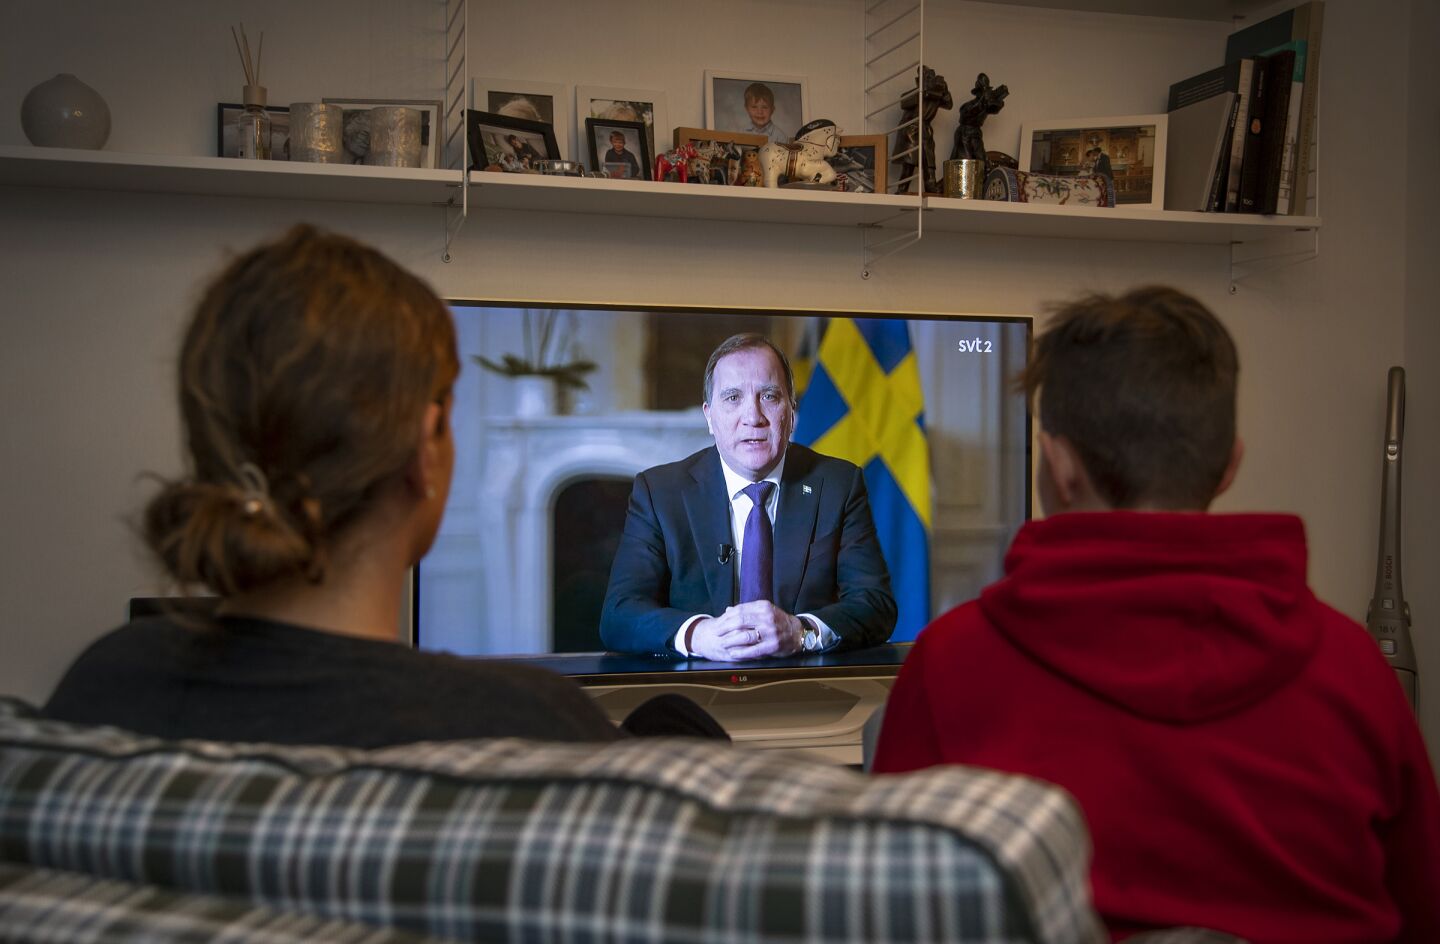 Sweden: Prime Minister Stefan Lofven addresses the nation about the coronavirus crisis, broadcast on Swedish national public television.